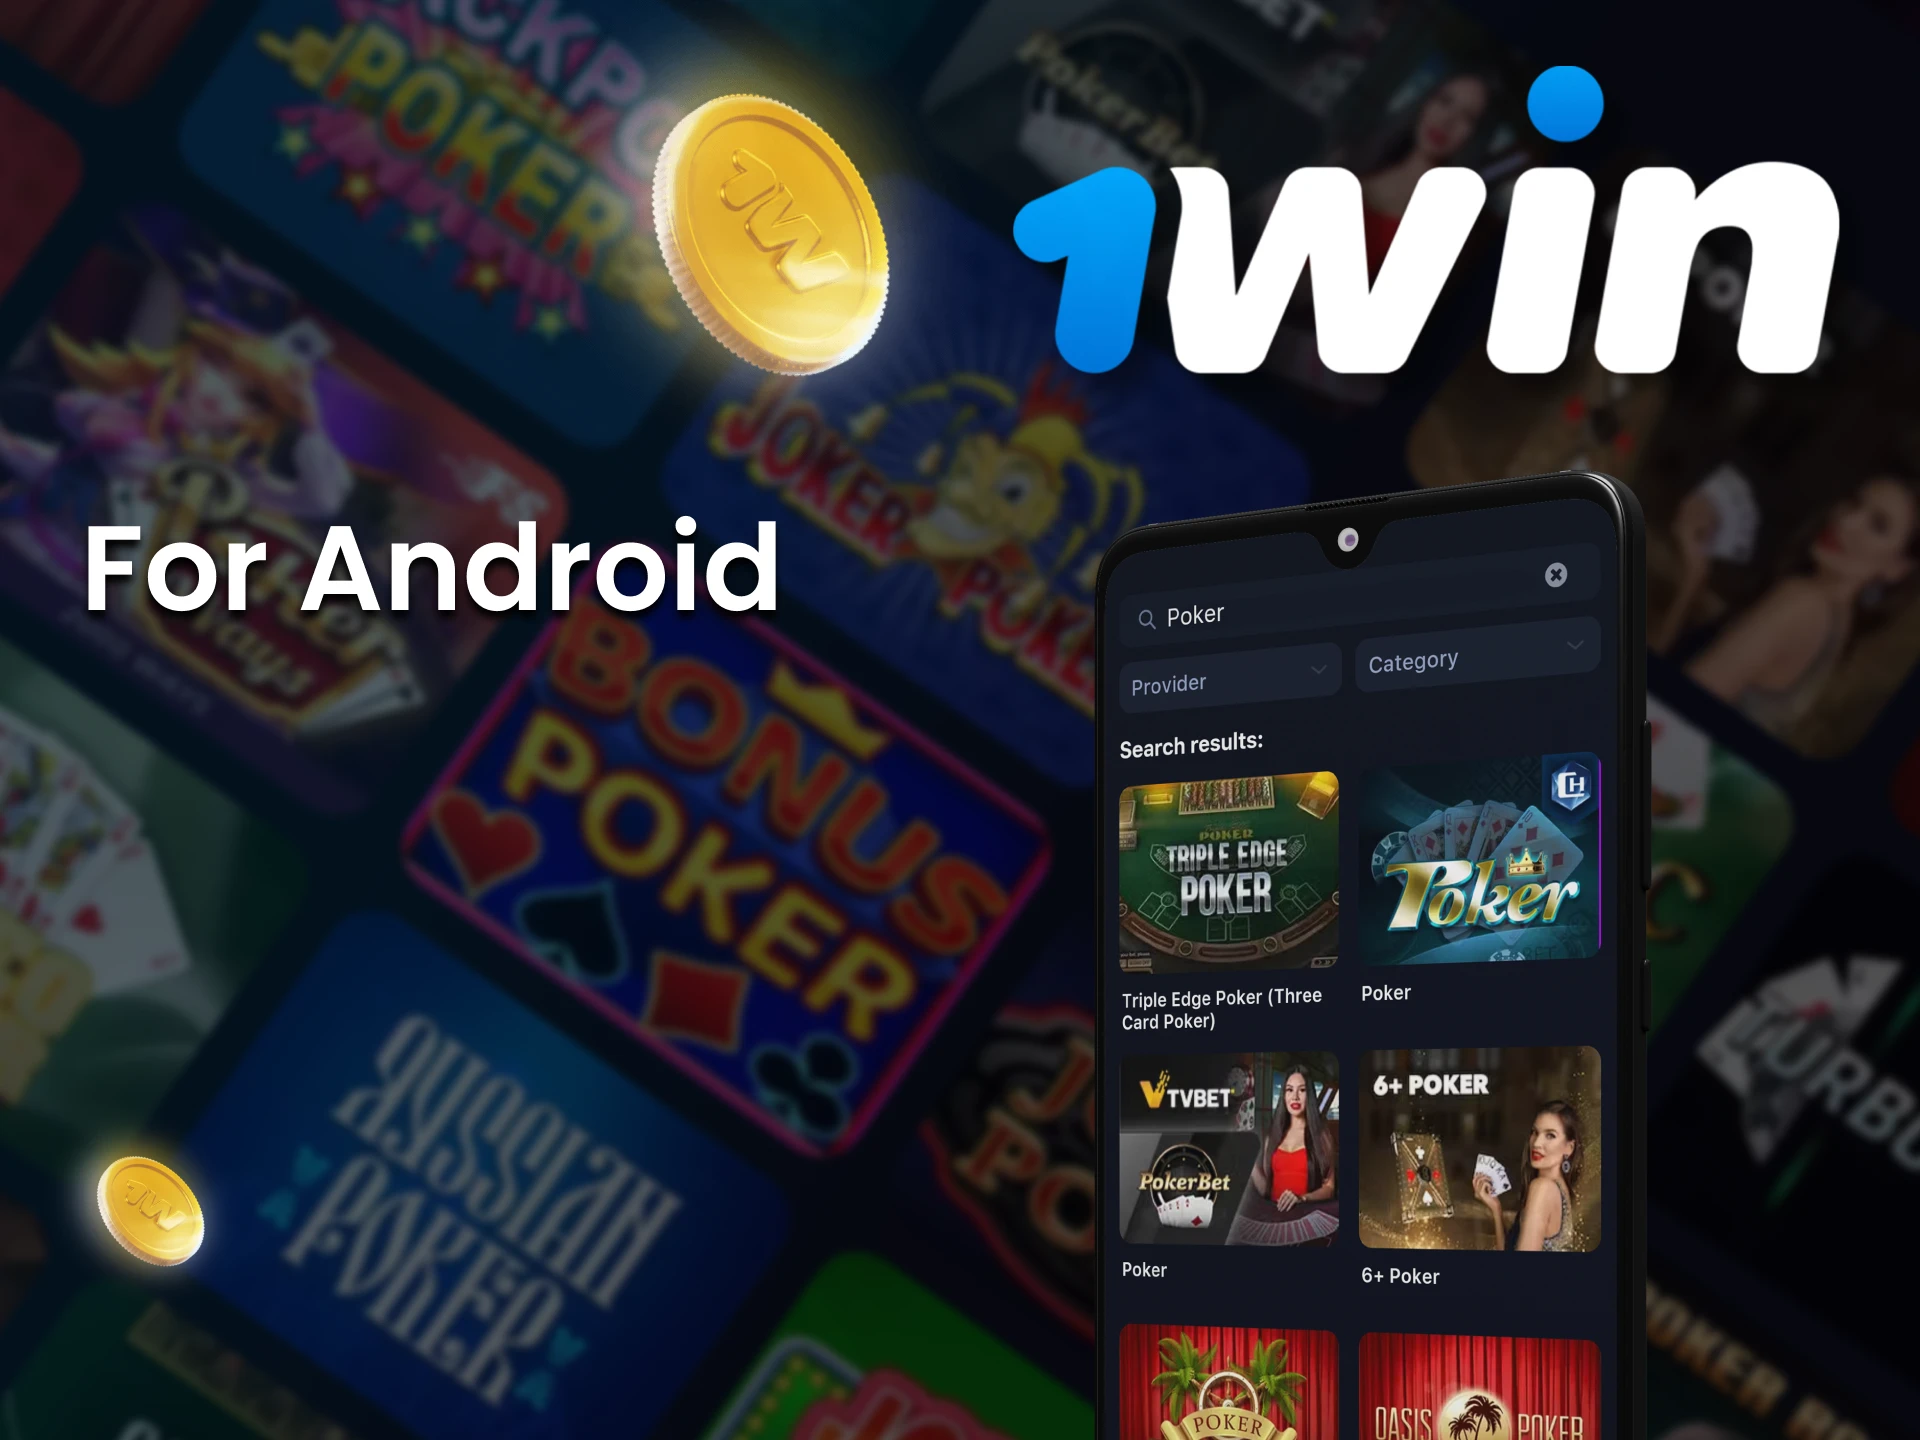 Play poker through the 1win app on Android devices.